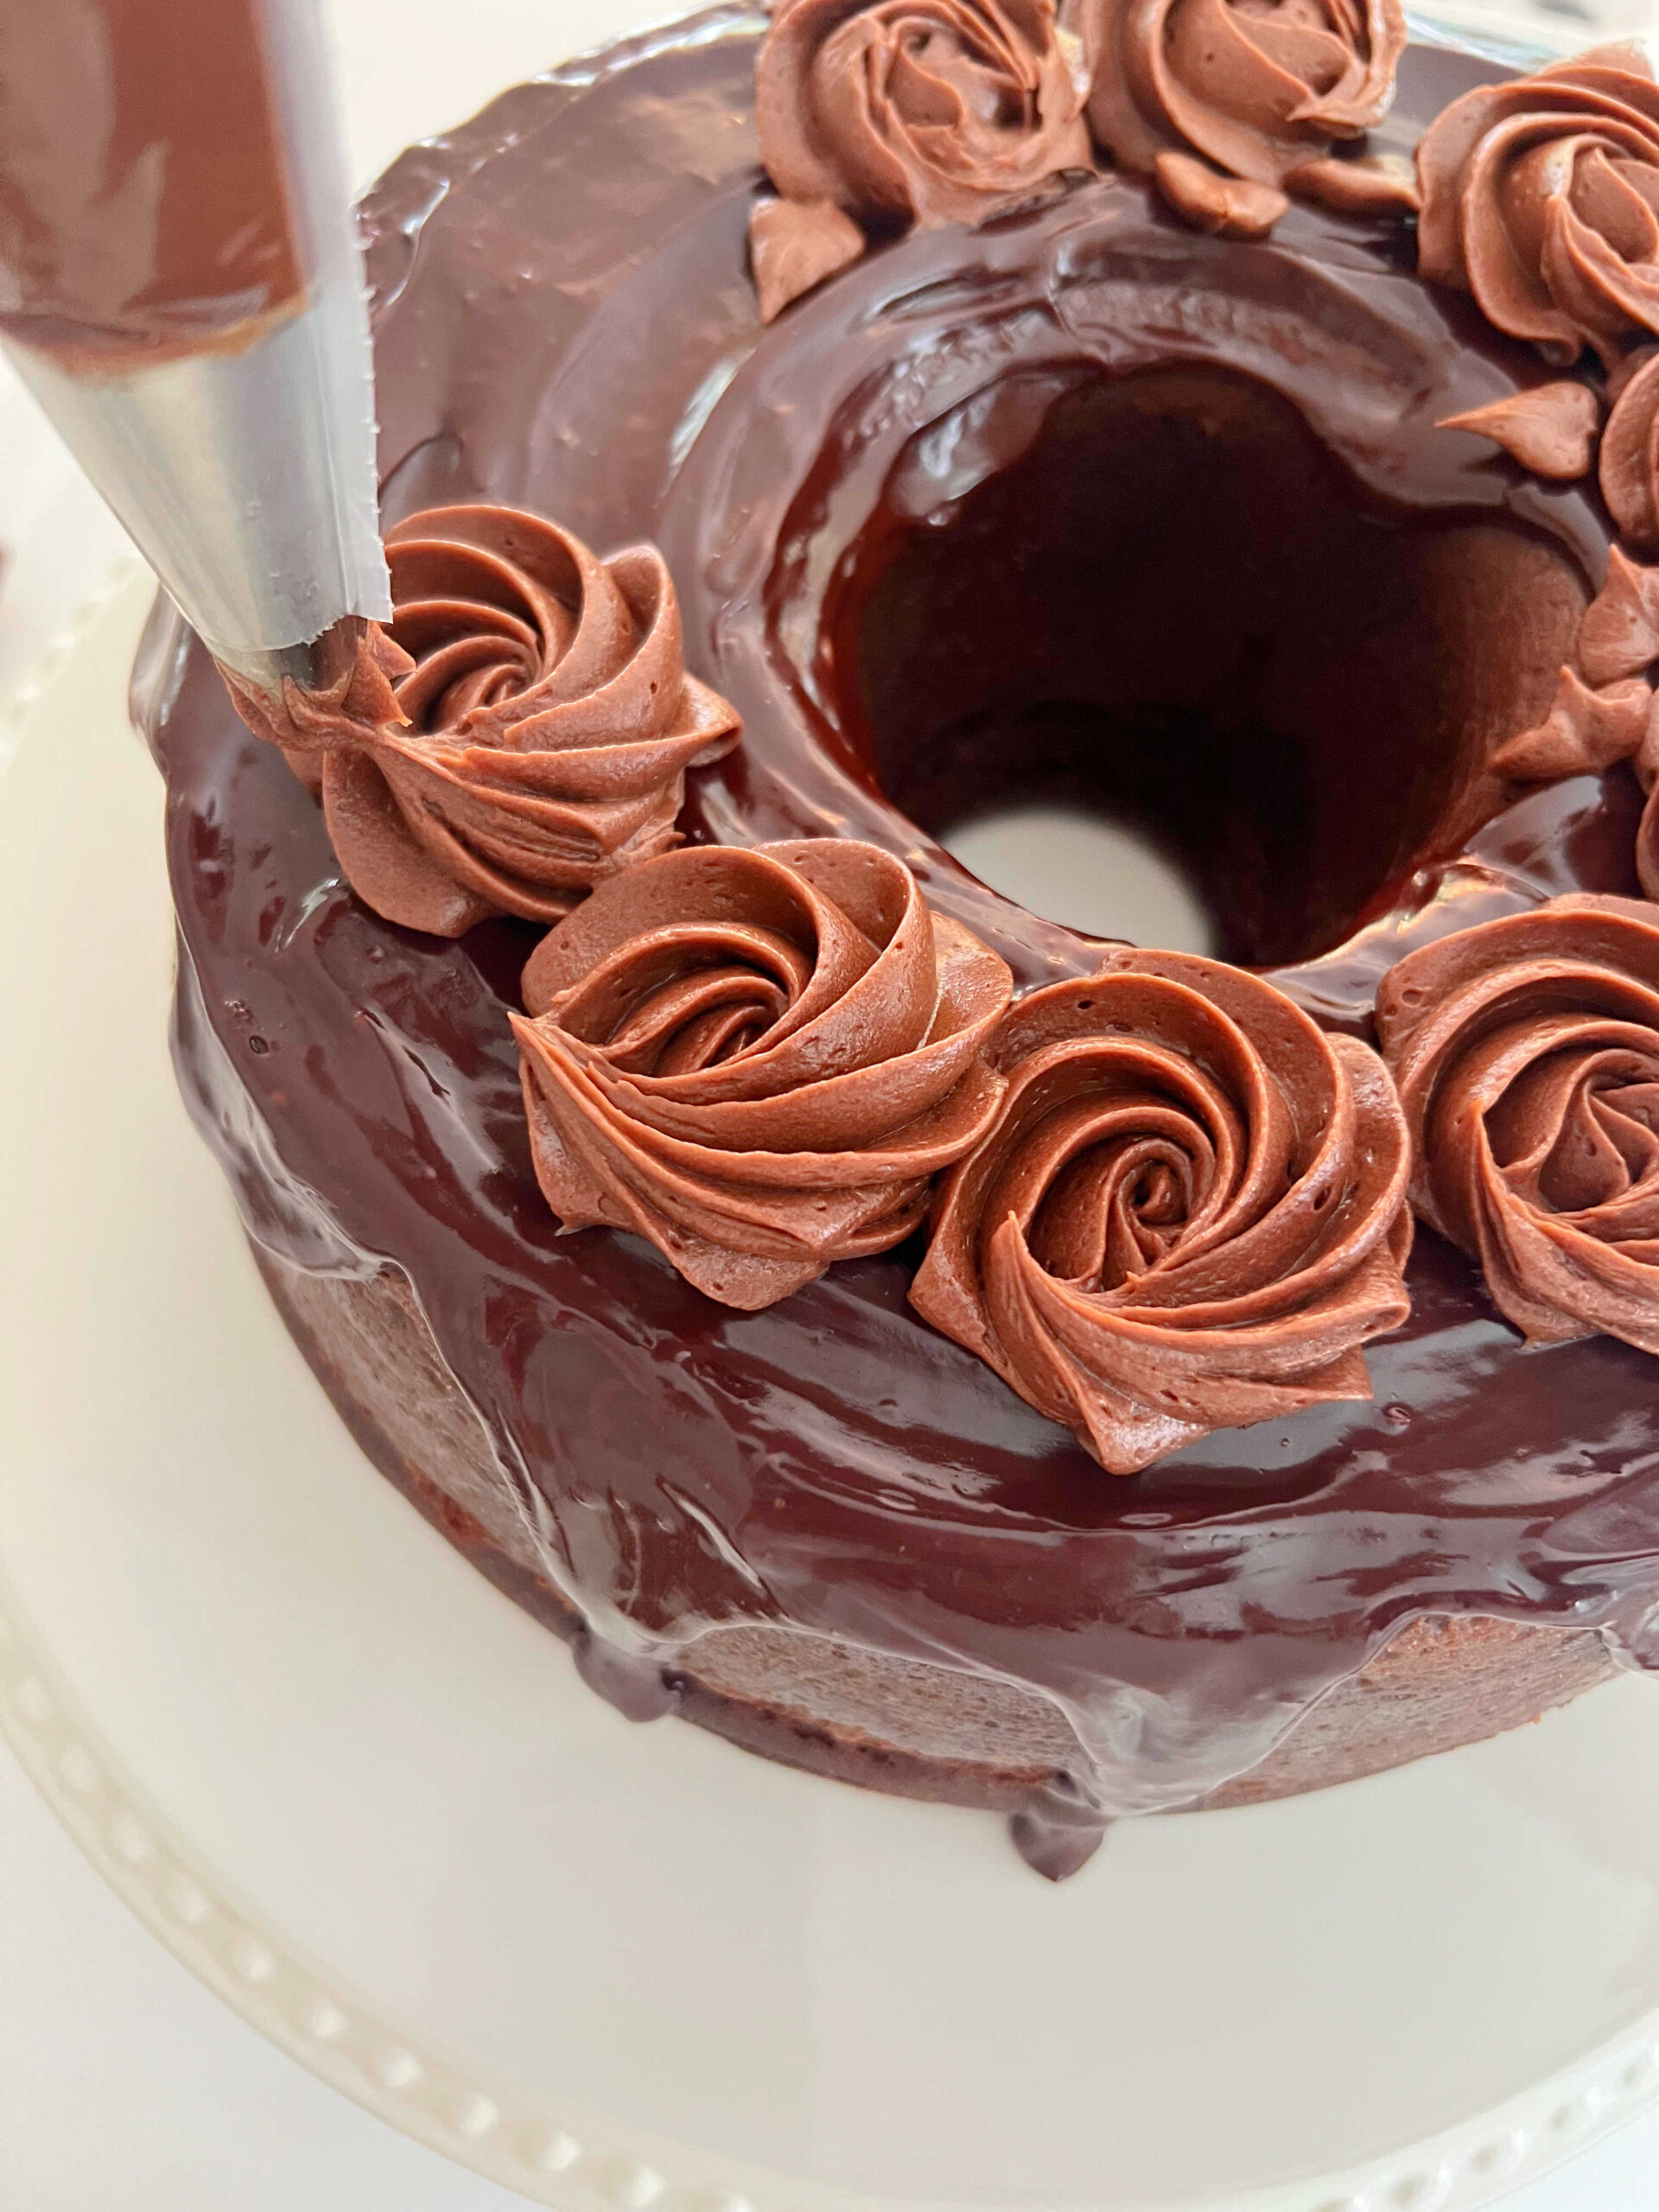 Piping Chocolate Buttercream Rosettes on top of the chocolate glazed bundt cake.